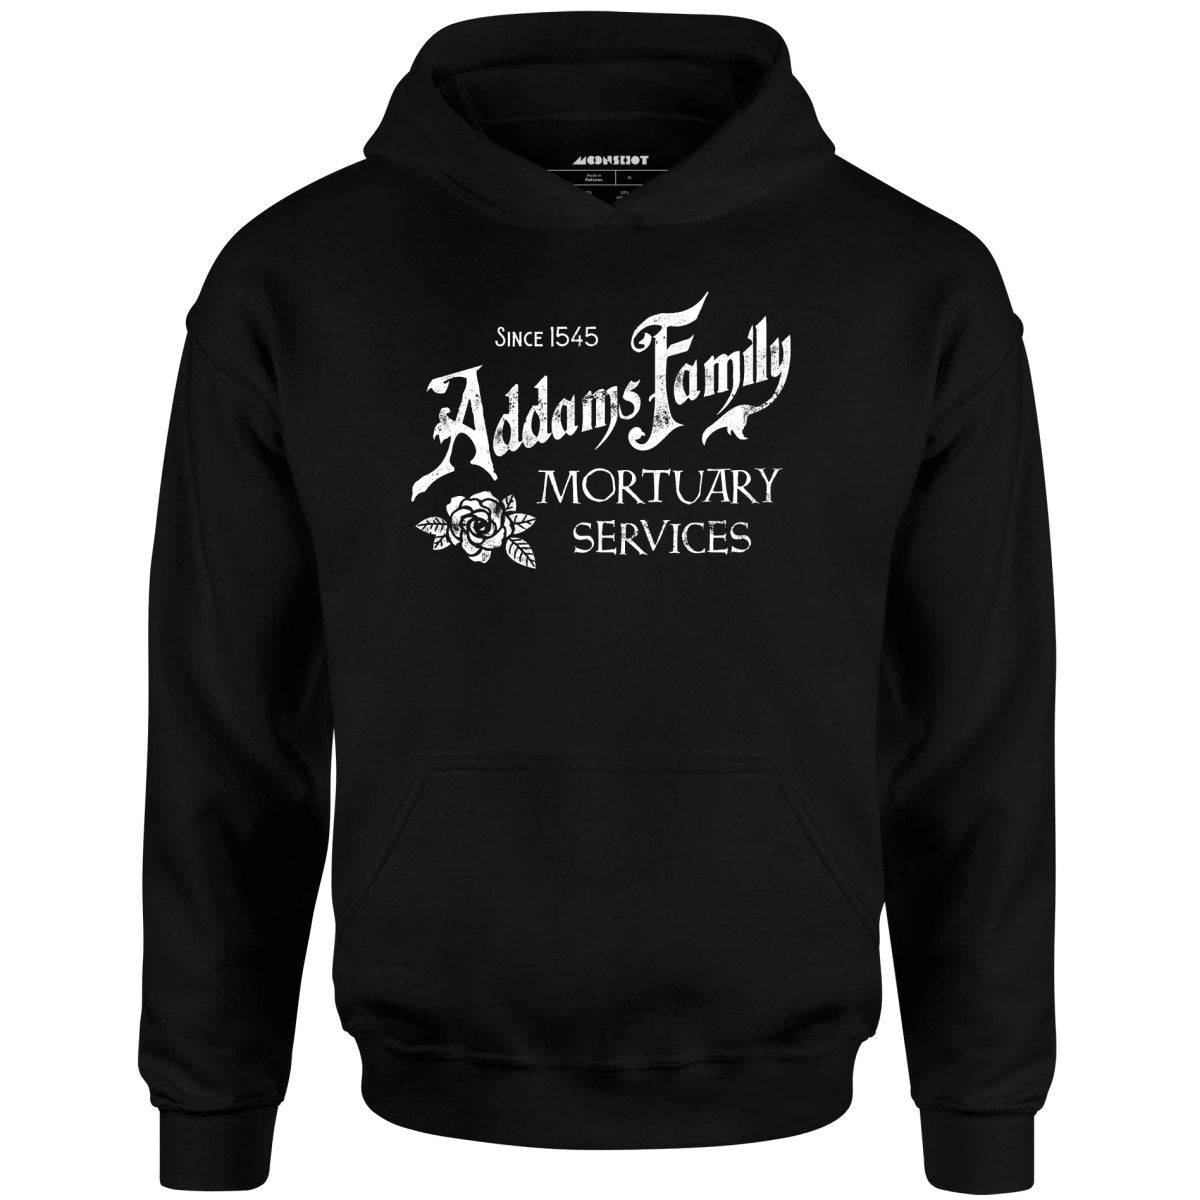 Addams Family Mortuary Services - Unisex Hoodie